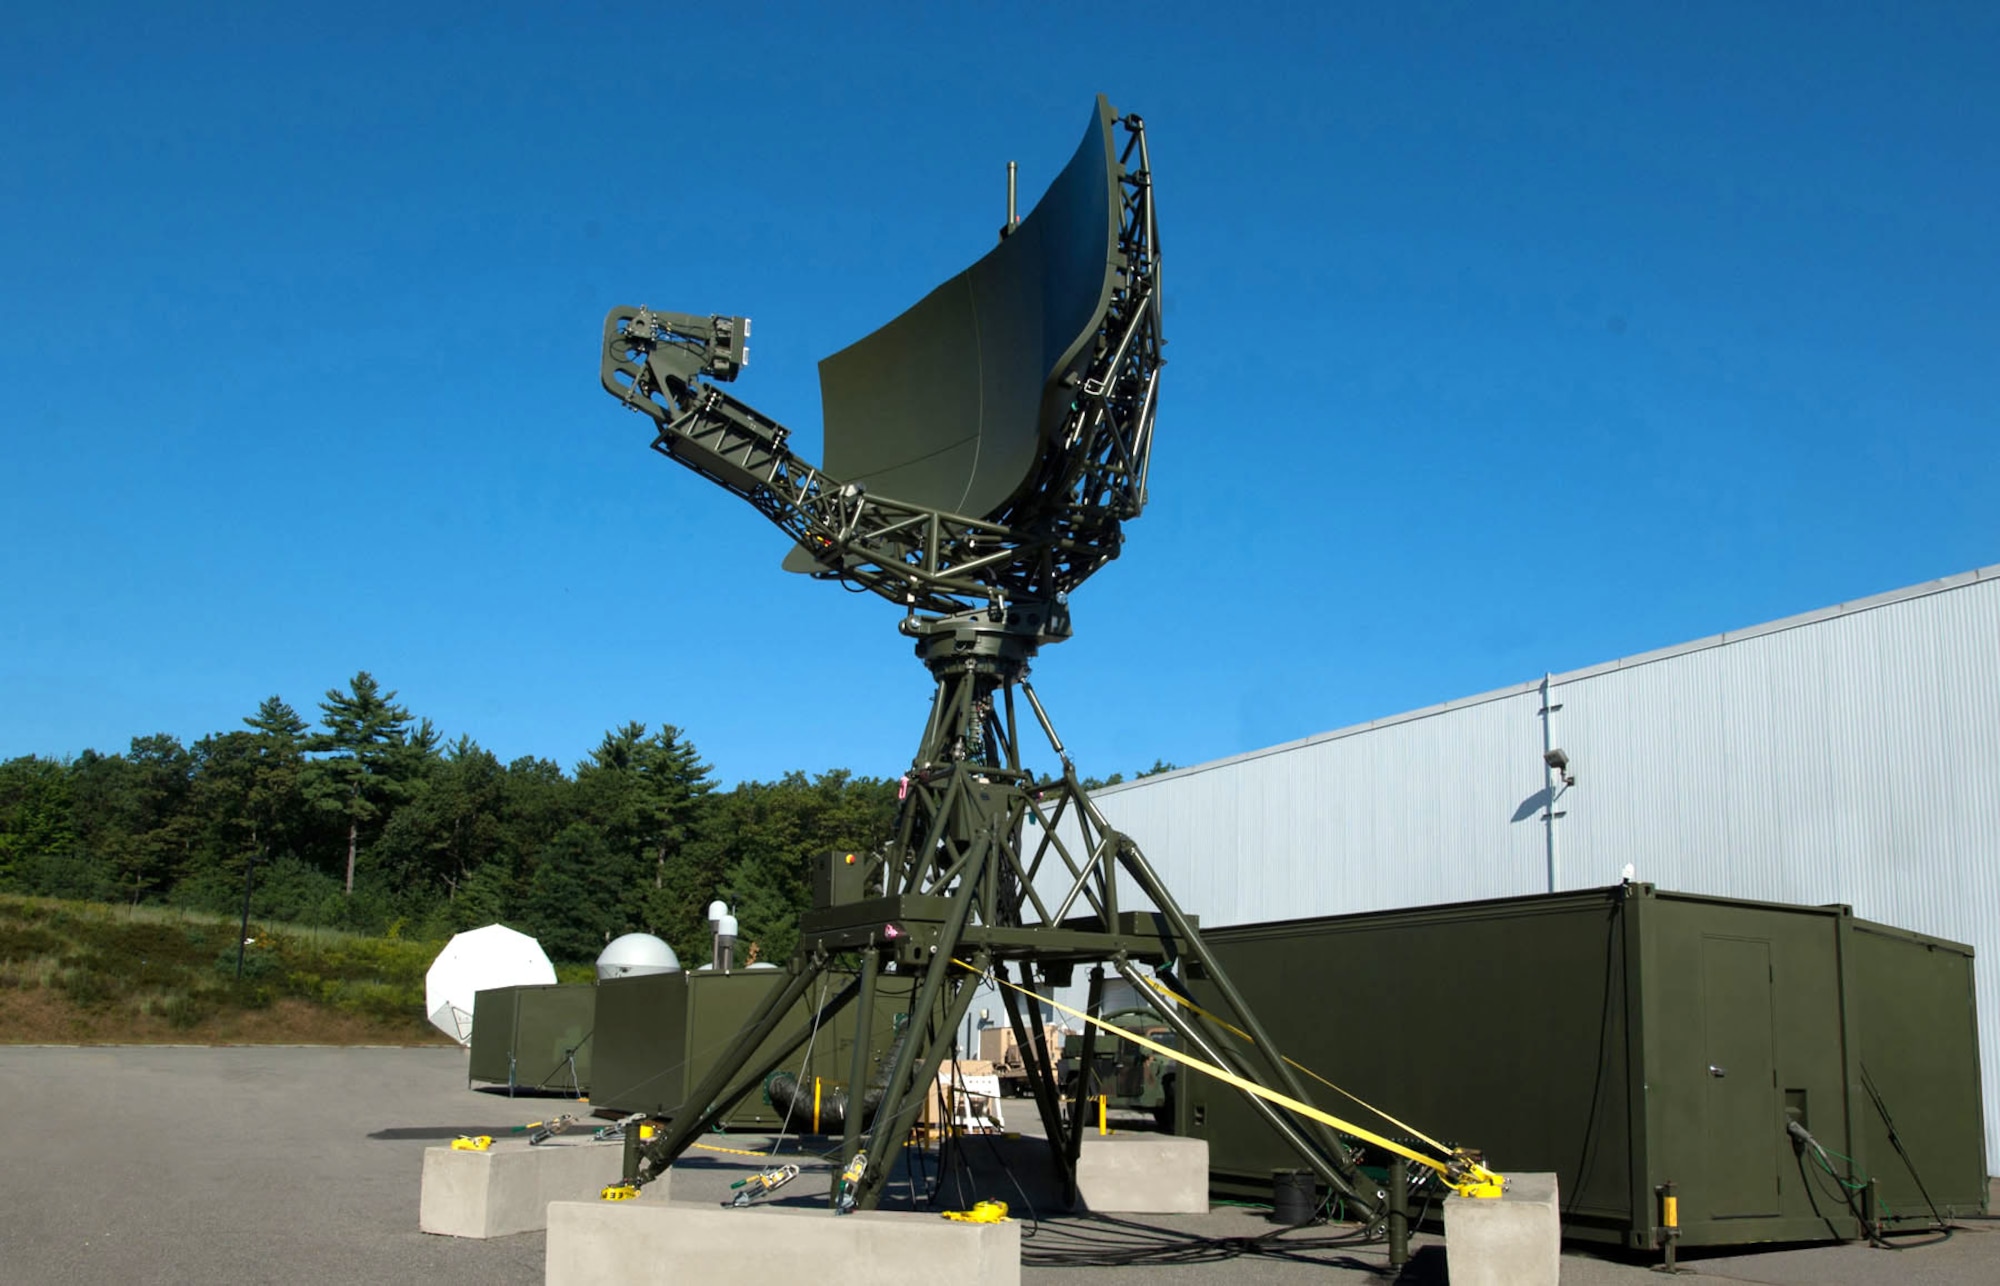 Raytheon’s mobile surveillance and air traffic control radar system, pictured here, represents one of the mobile ATC radar systems in the Deployable Radar Approach Control, or D-RAPCON, system. (Courtesy photo)